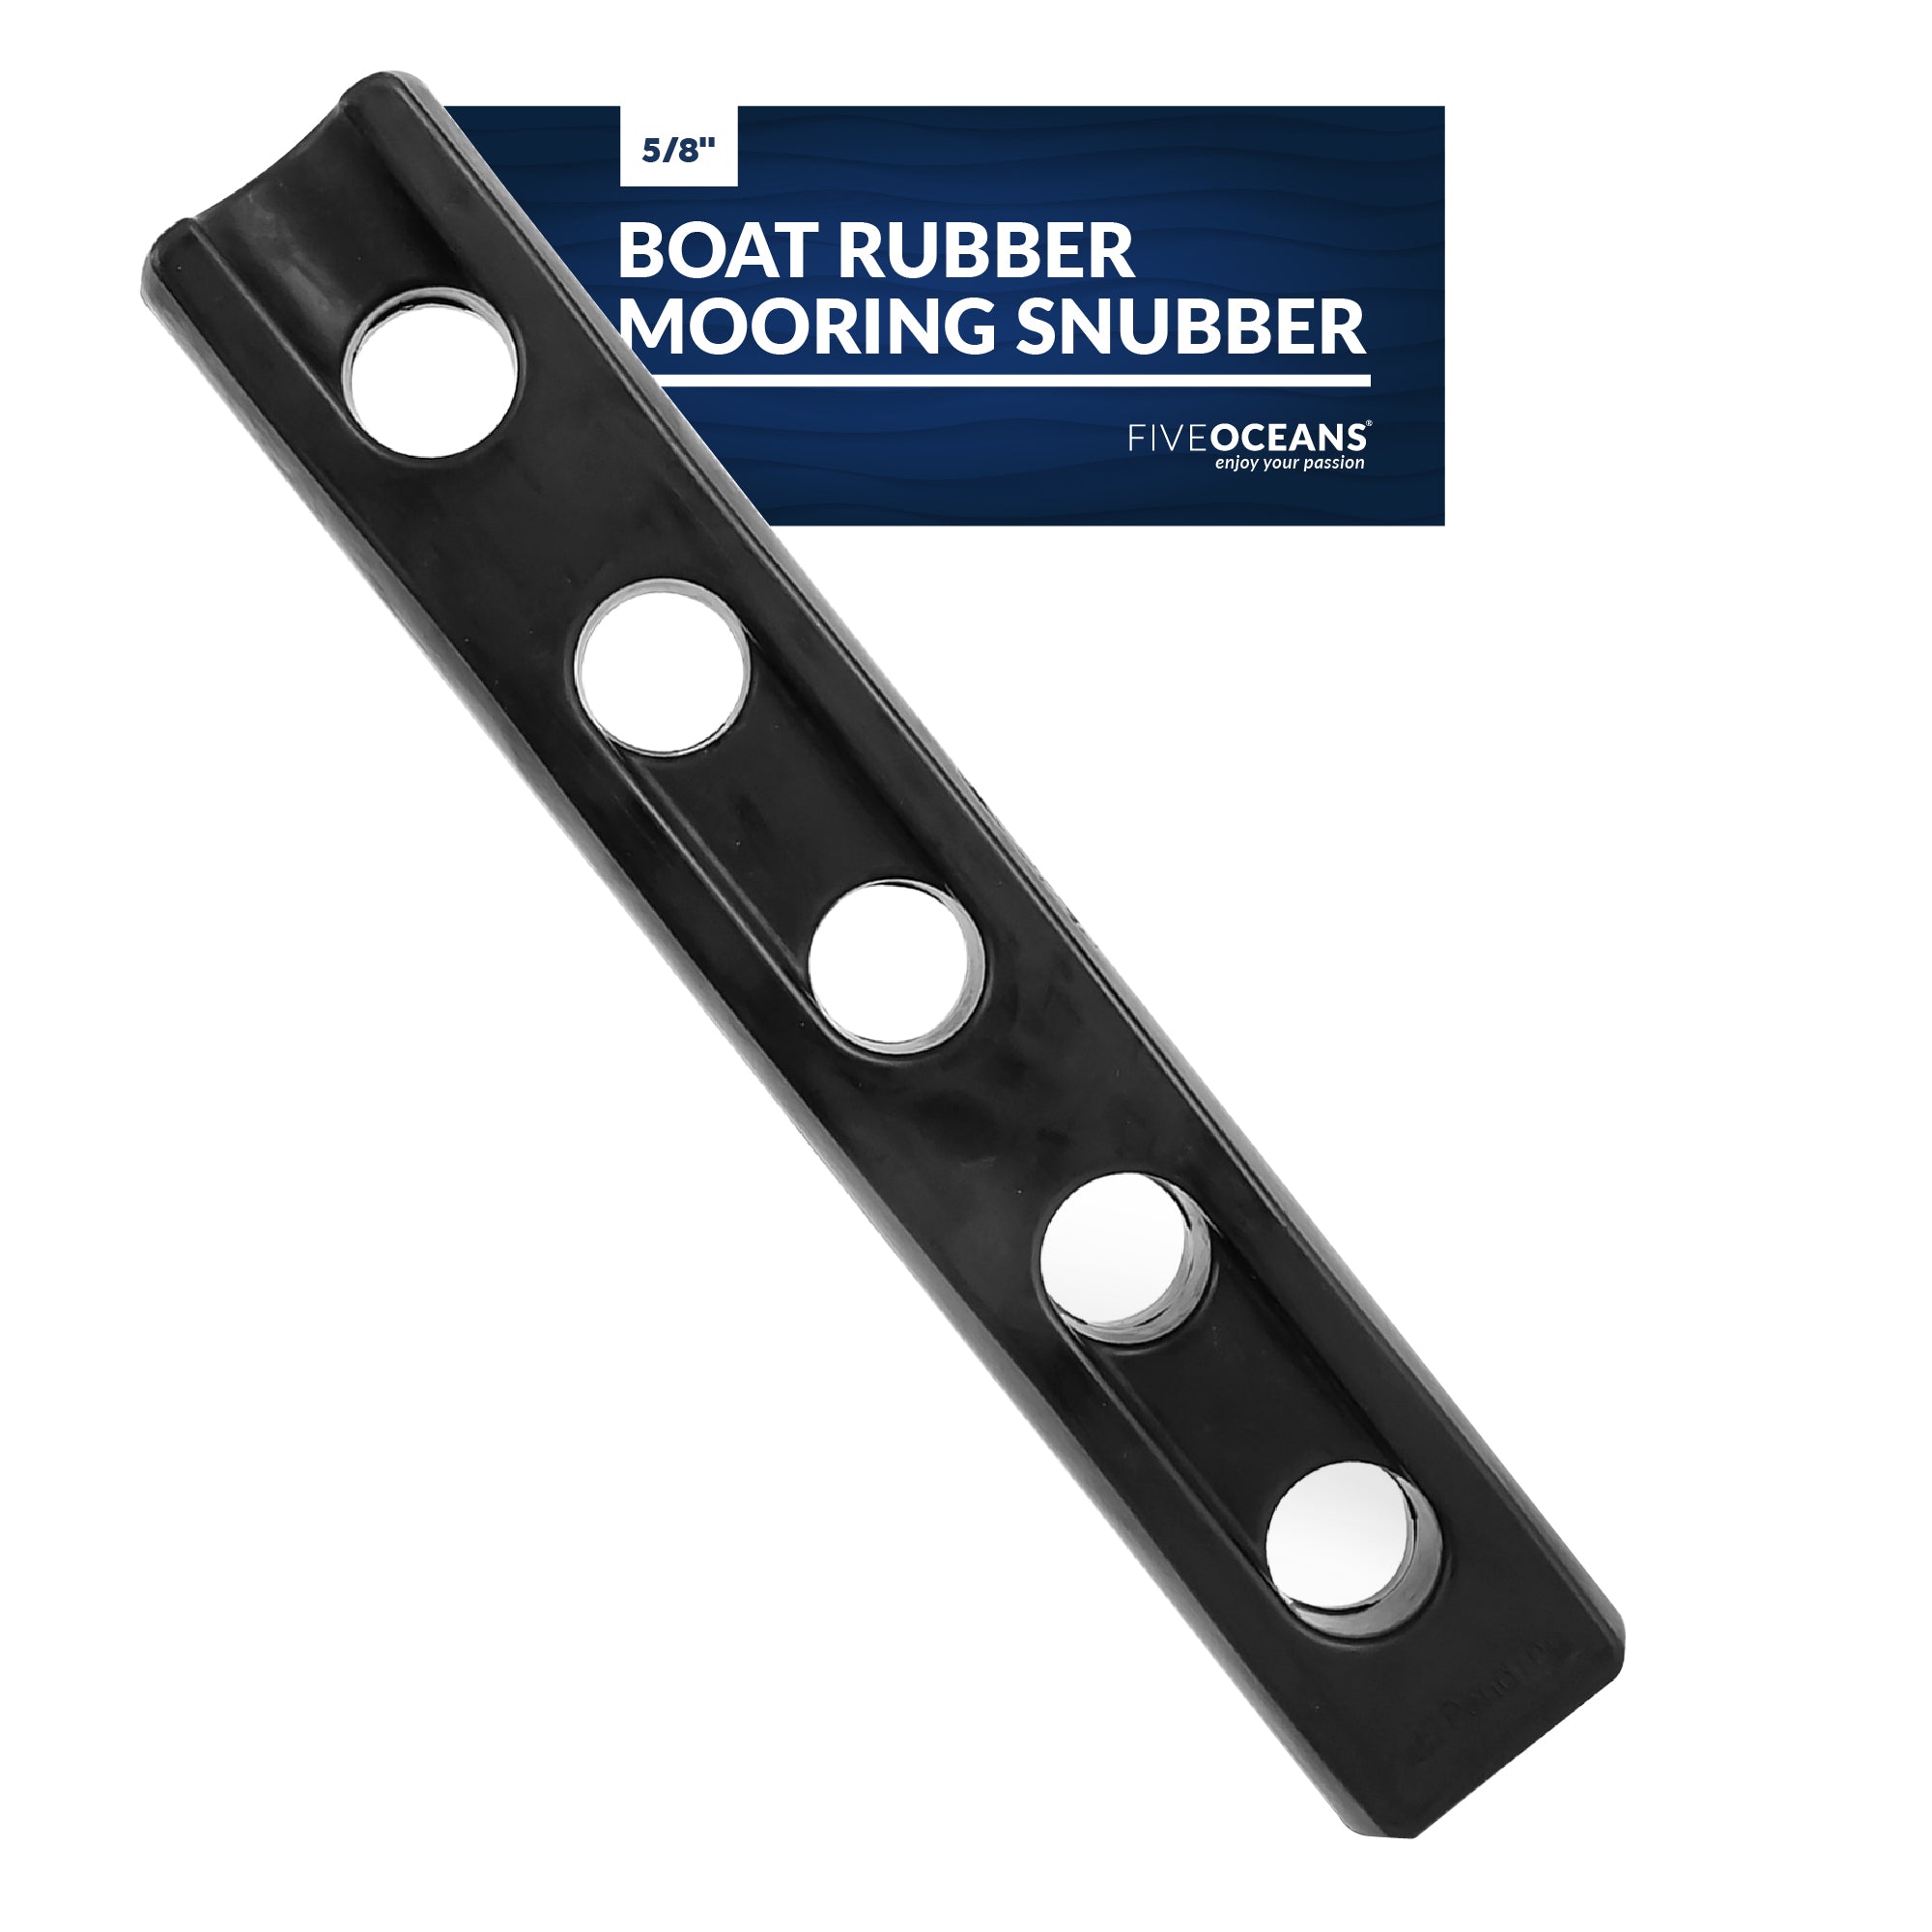 Boat Rubber Mooring Snubber, Compatible with 5/8 inches - 13/16 inches Dock Lines, Made of EPDM Rubber, UV-Resistant, Up to 65 Feet Boats FO4435